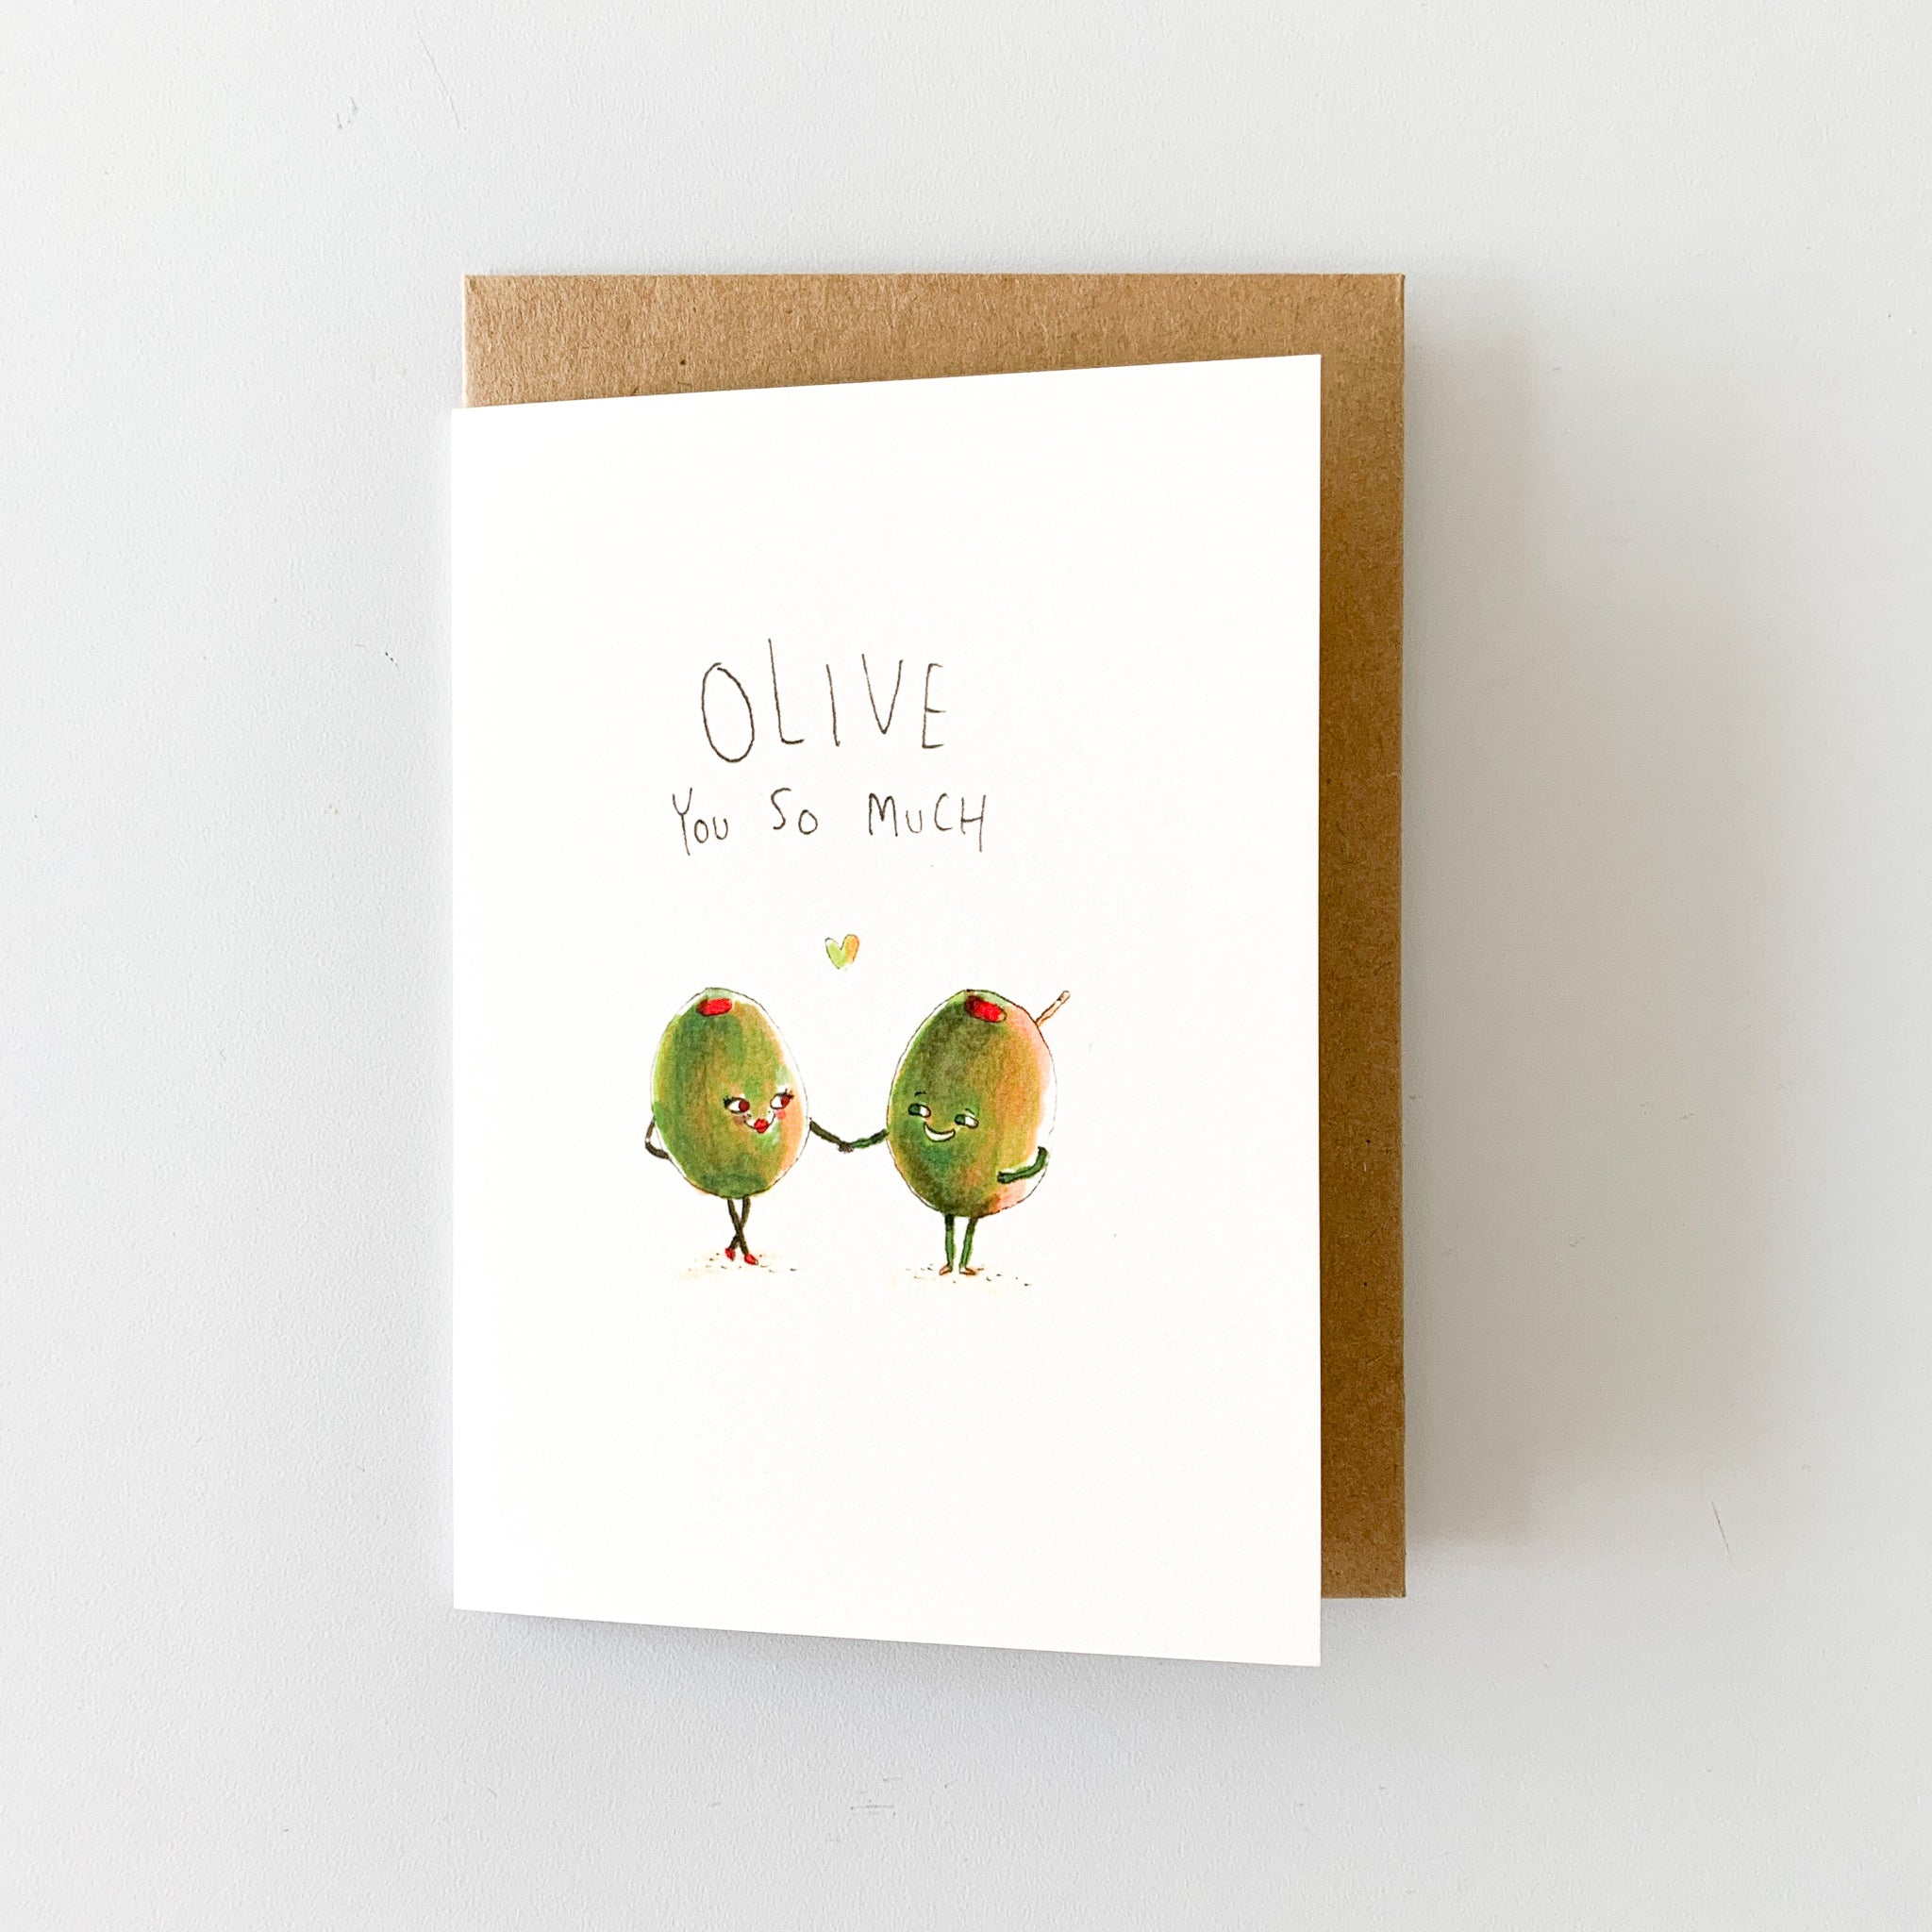 Olive You So Much - Well Drawn